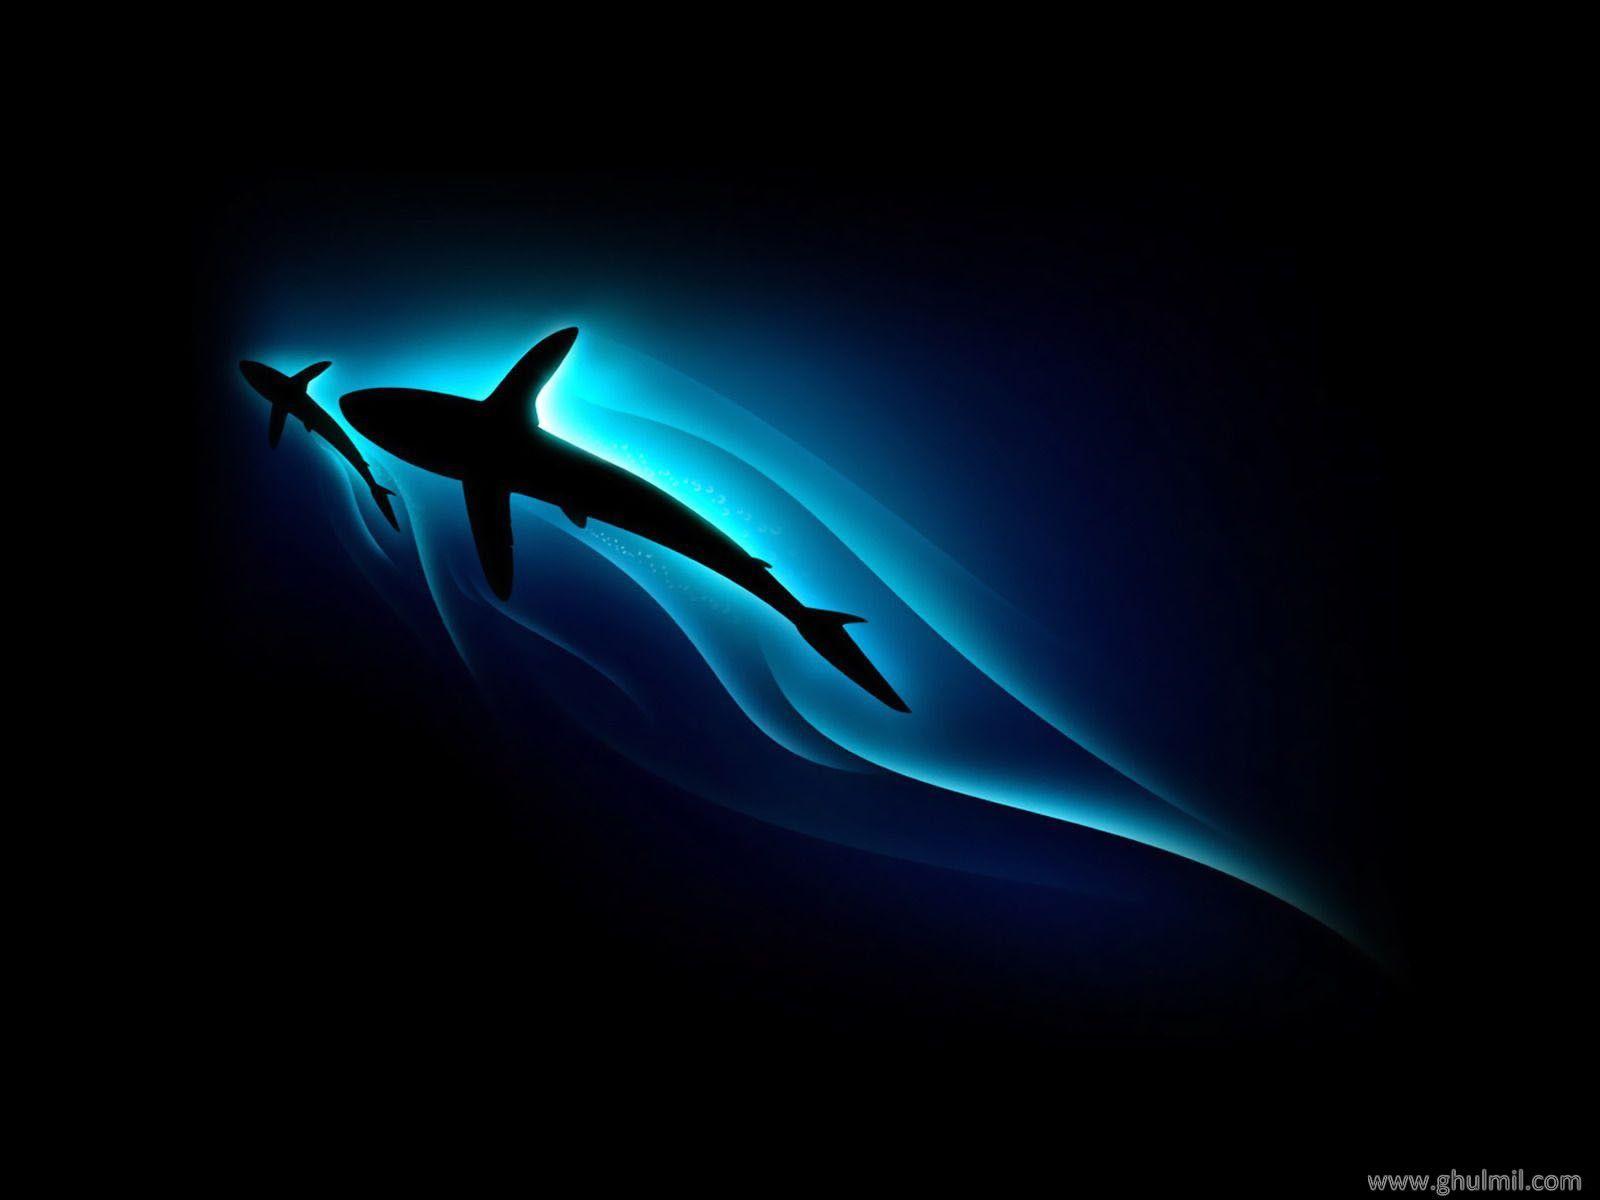 shark attack art background high definition amazing cool